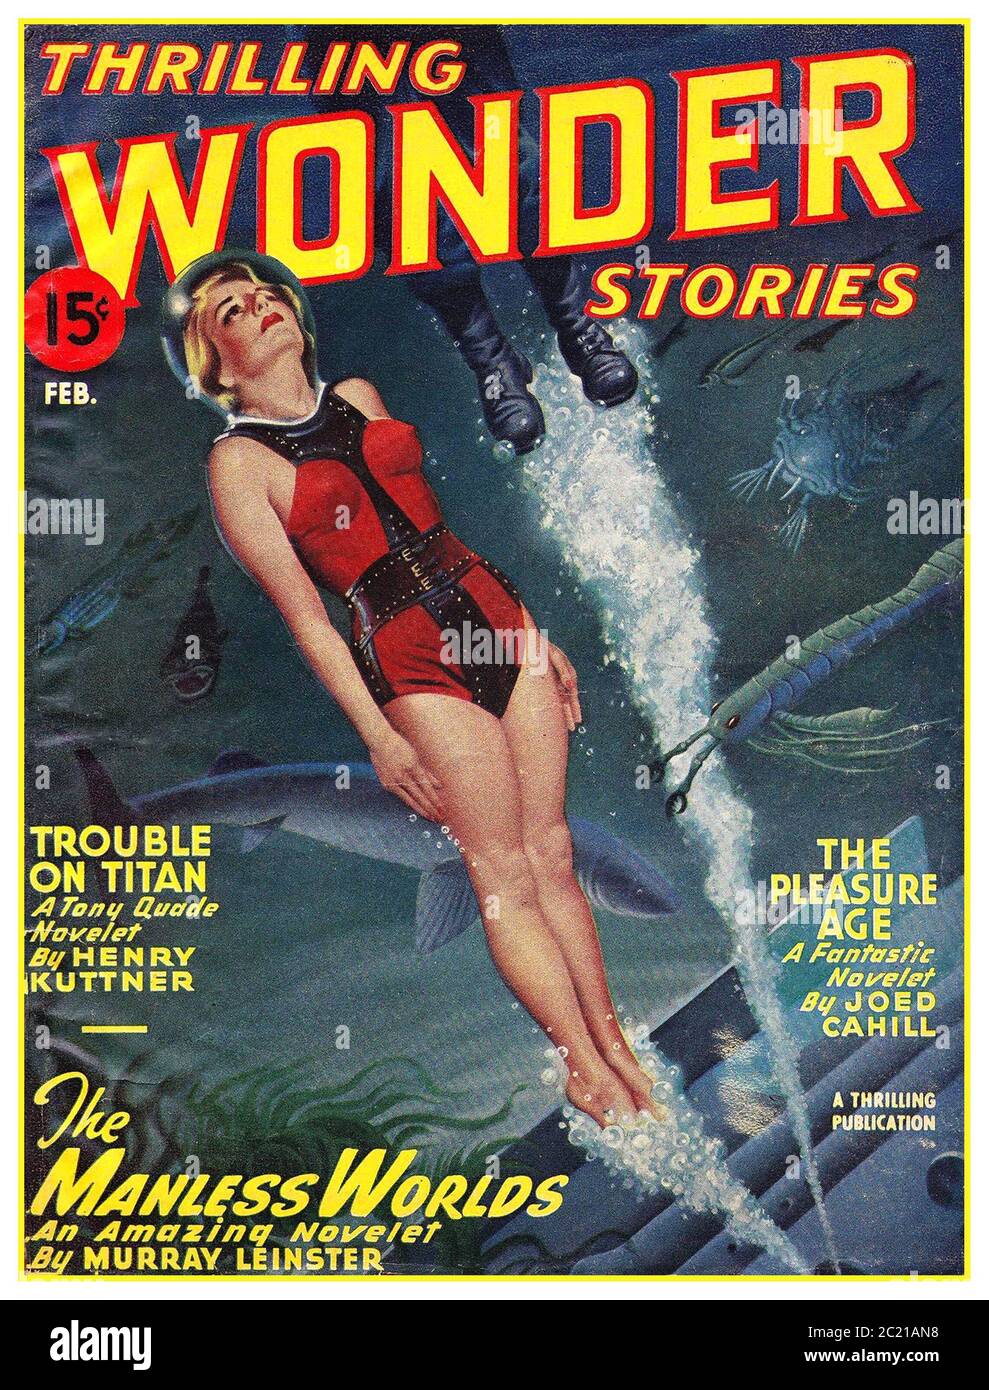 Archive magazine 1940's 'Thrilling Wonder Stories', February 1947 Cover by Earle K. Bergey featuring Trouble on Titan by Henry Kuttner,The Manless Worlds by Murray Leinster, The Pleasure Age by Joed Cahill, a Thrilling Publication Stock Photo